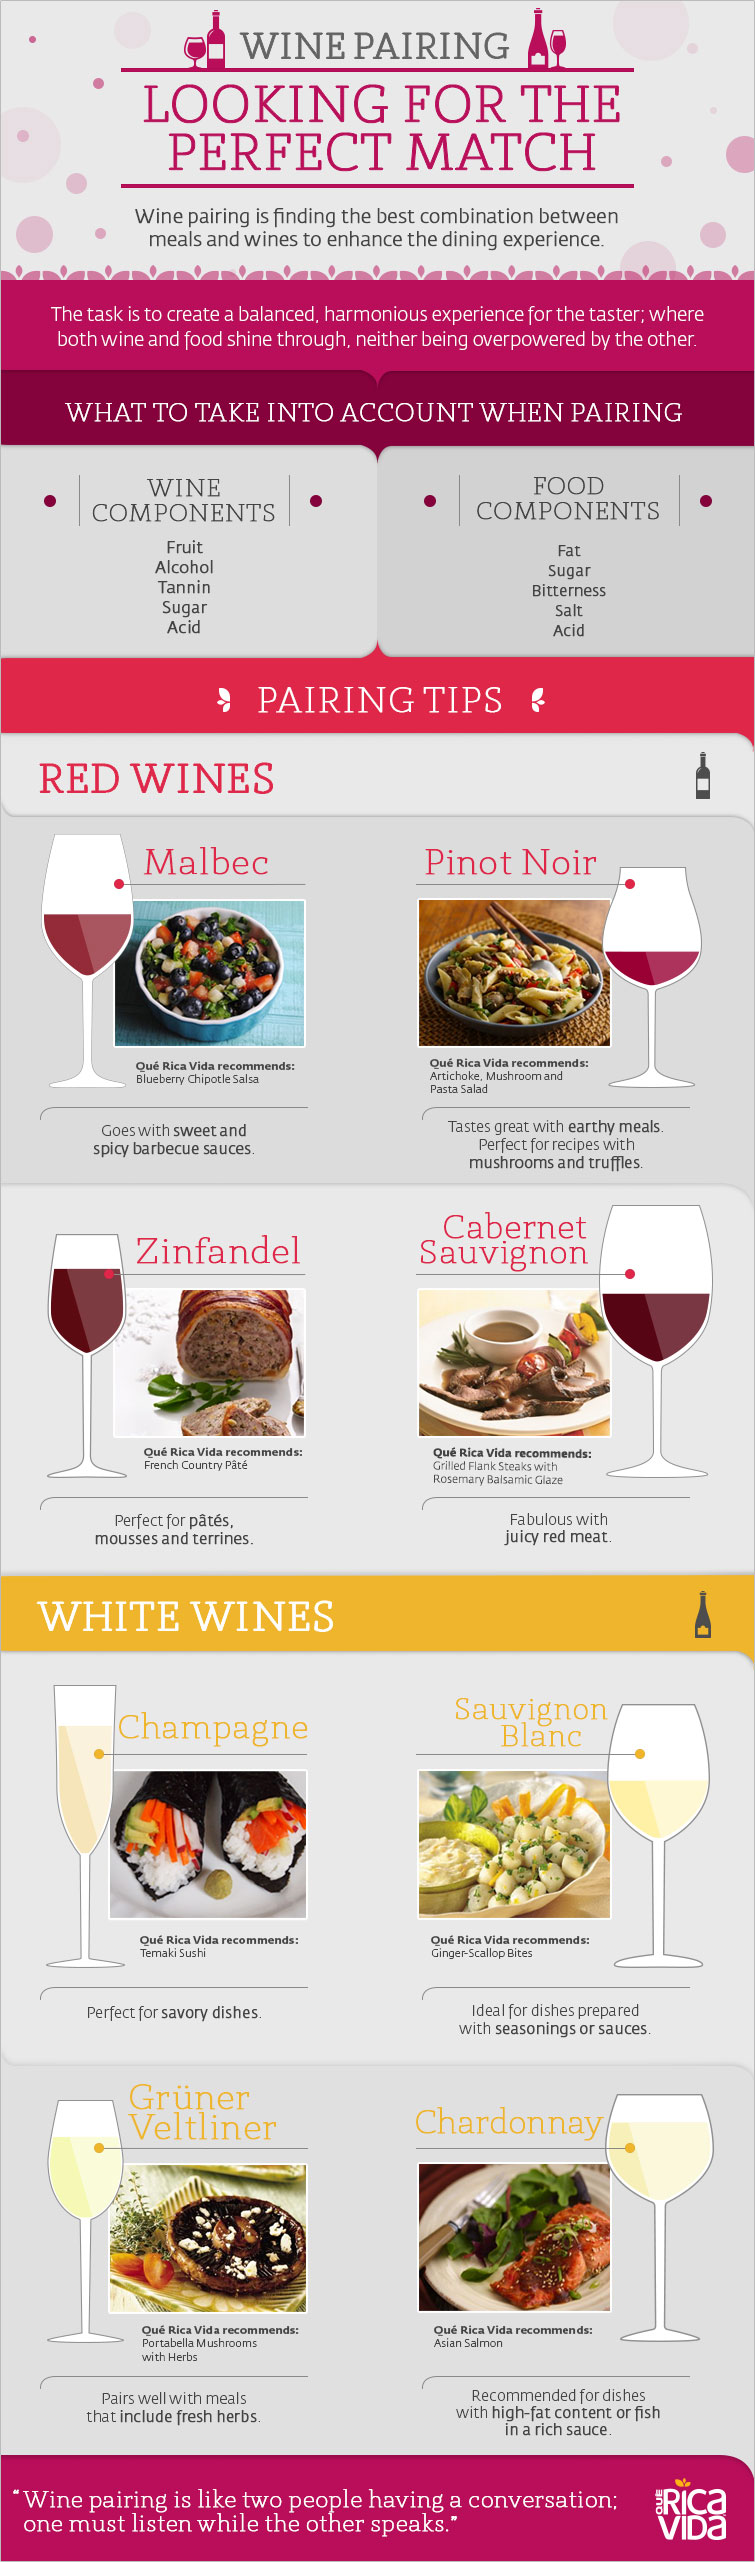 Wine Pairing: Looking for the Perfect Wine Match